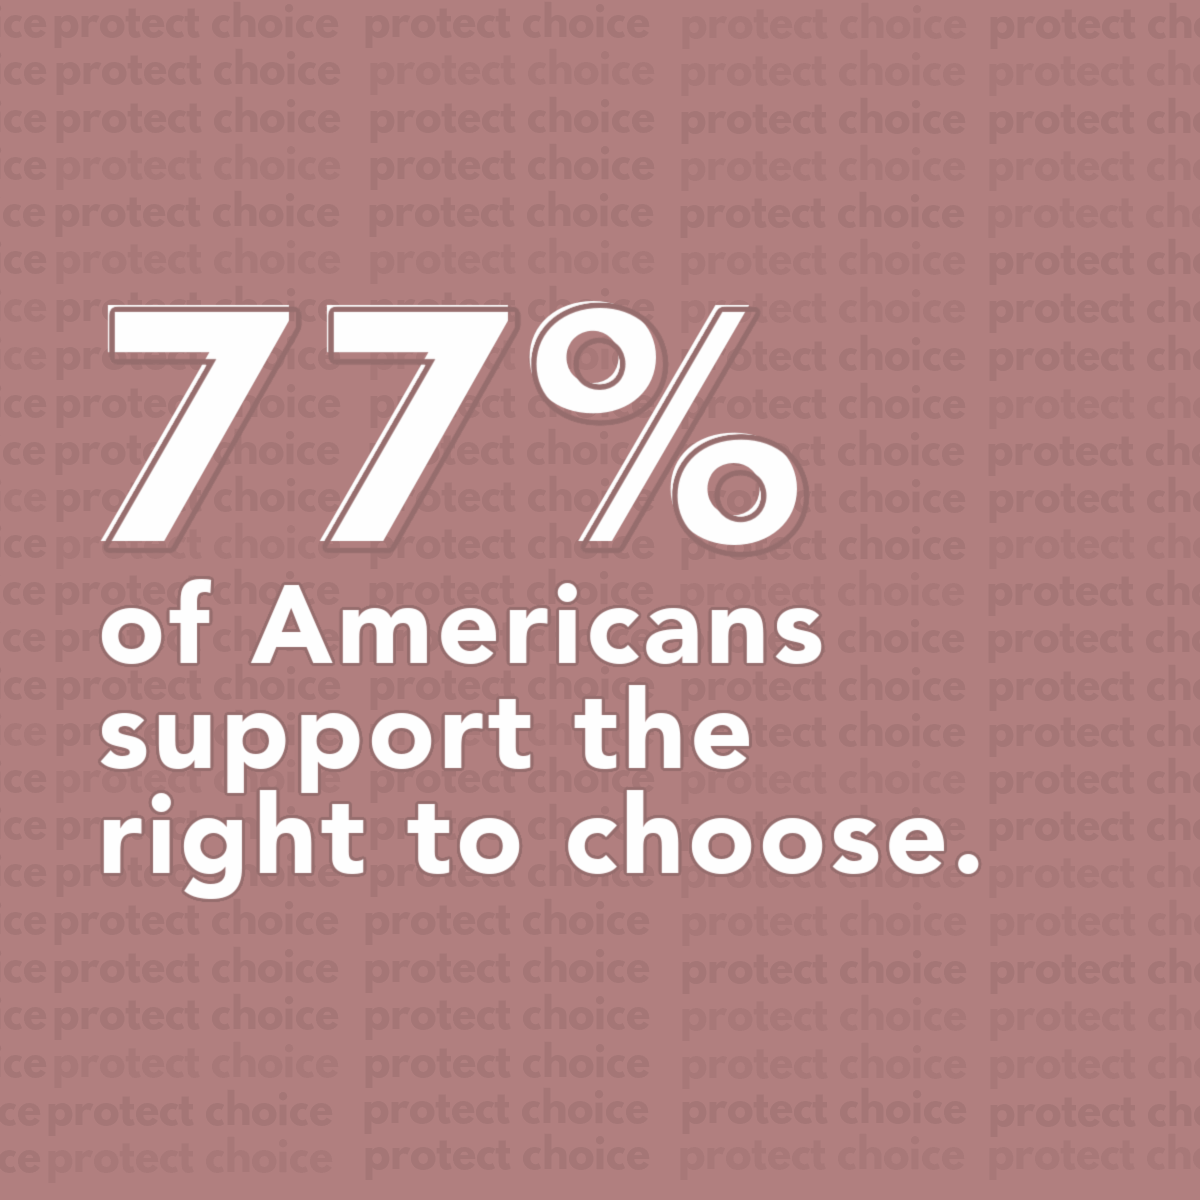 Nearly 8 in 10 Americans support the right to choose - but that's not stopping Republicans' relentless crusade to interfere in families' private medical decisions. Shame on the GOP.
 Image